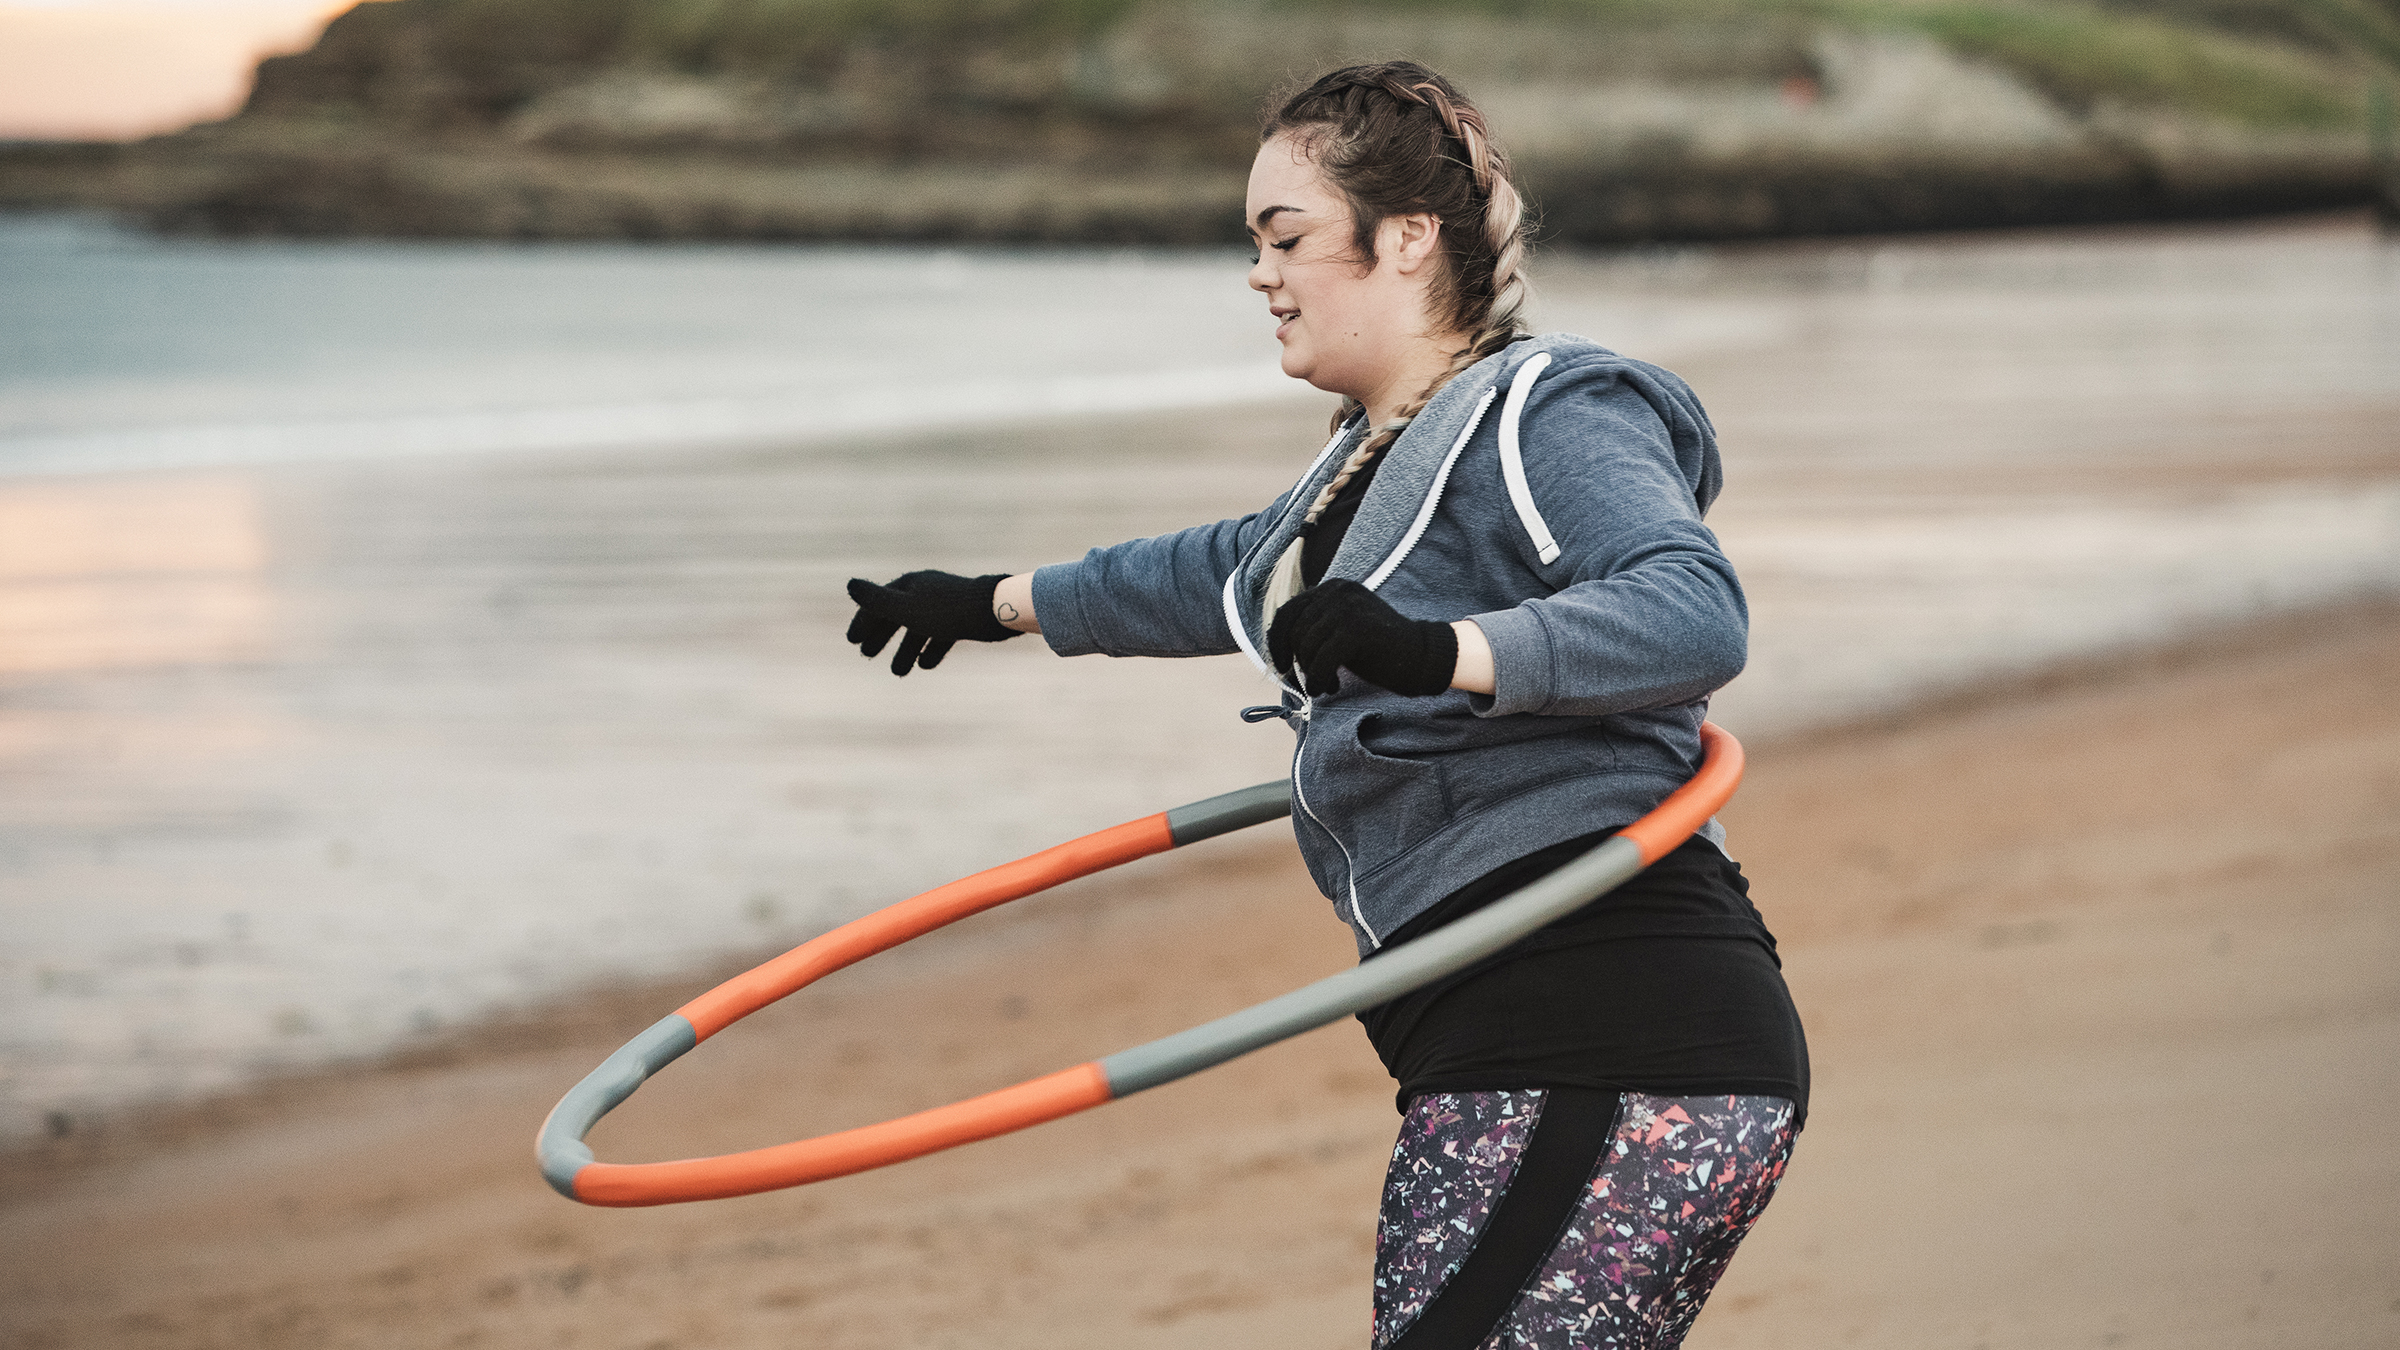 Weighted hula hoops: Why they're great for workouts - TODAY